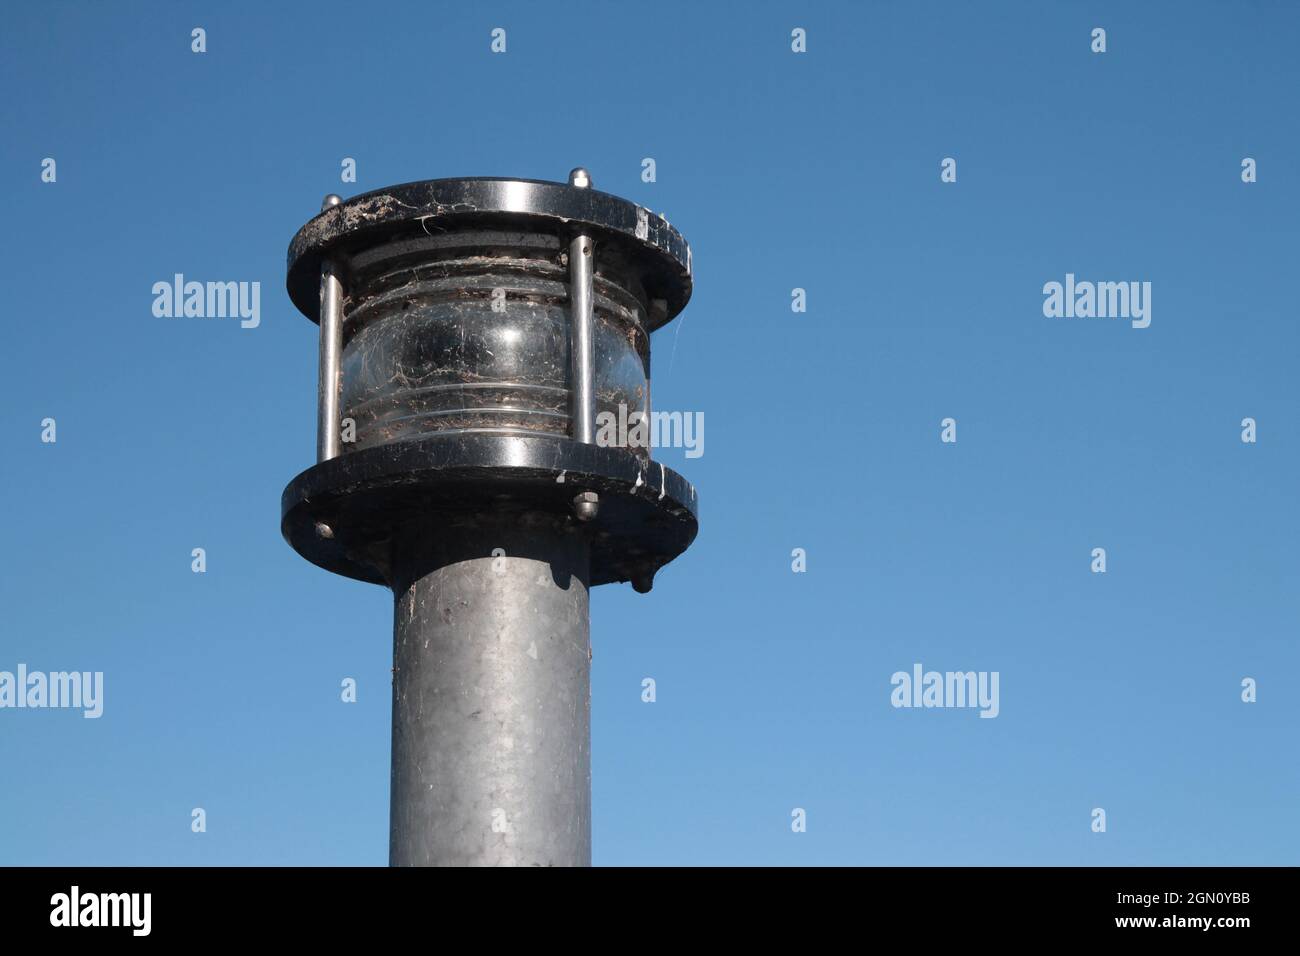 A vintage traditional lamp in the blue sky with spider nets Stock Photo